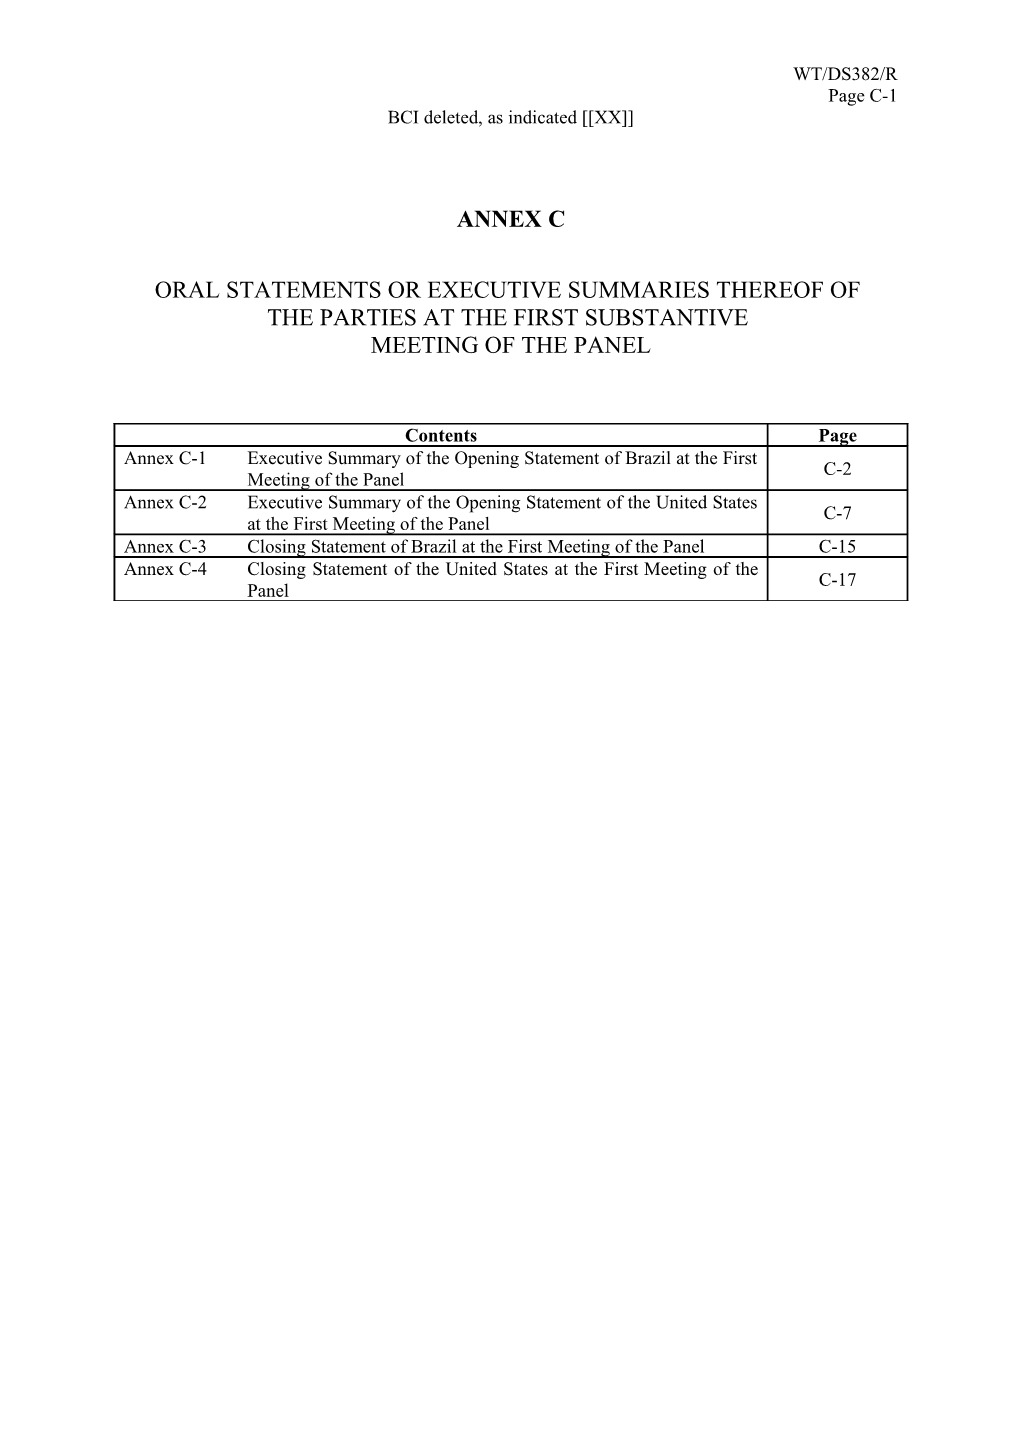 Oral Statements Or Executive Summaries Thereof Of